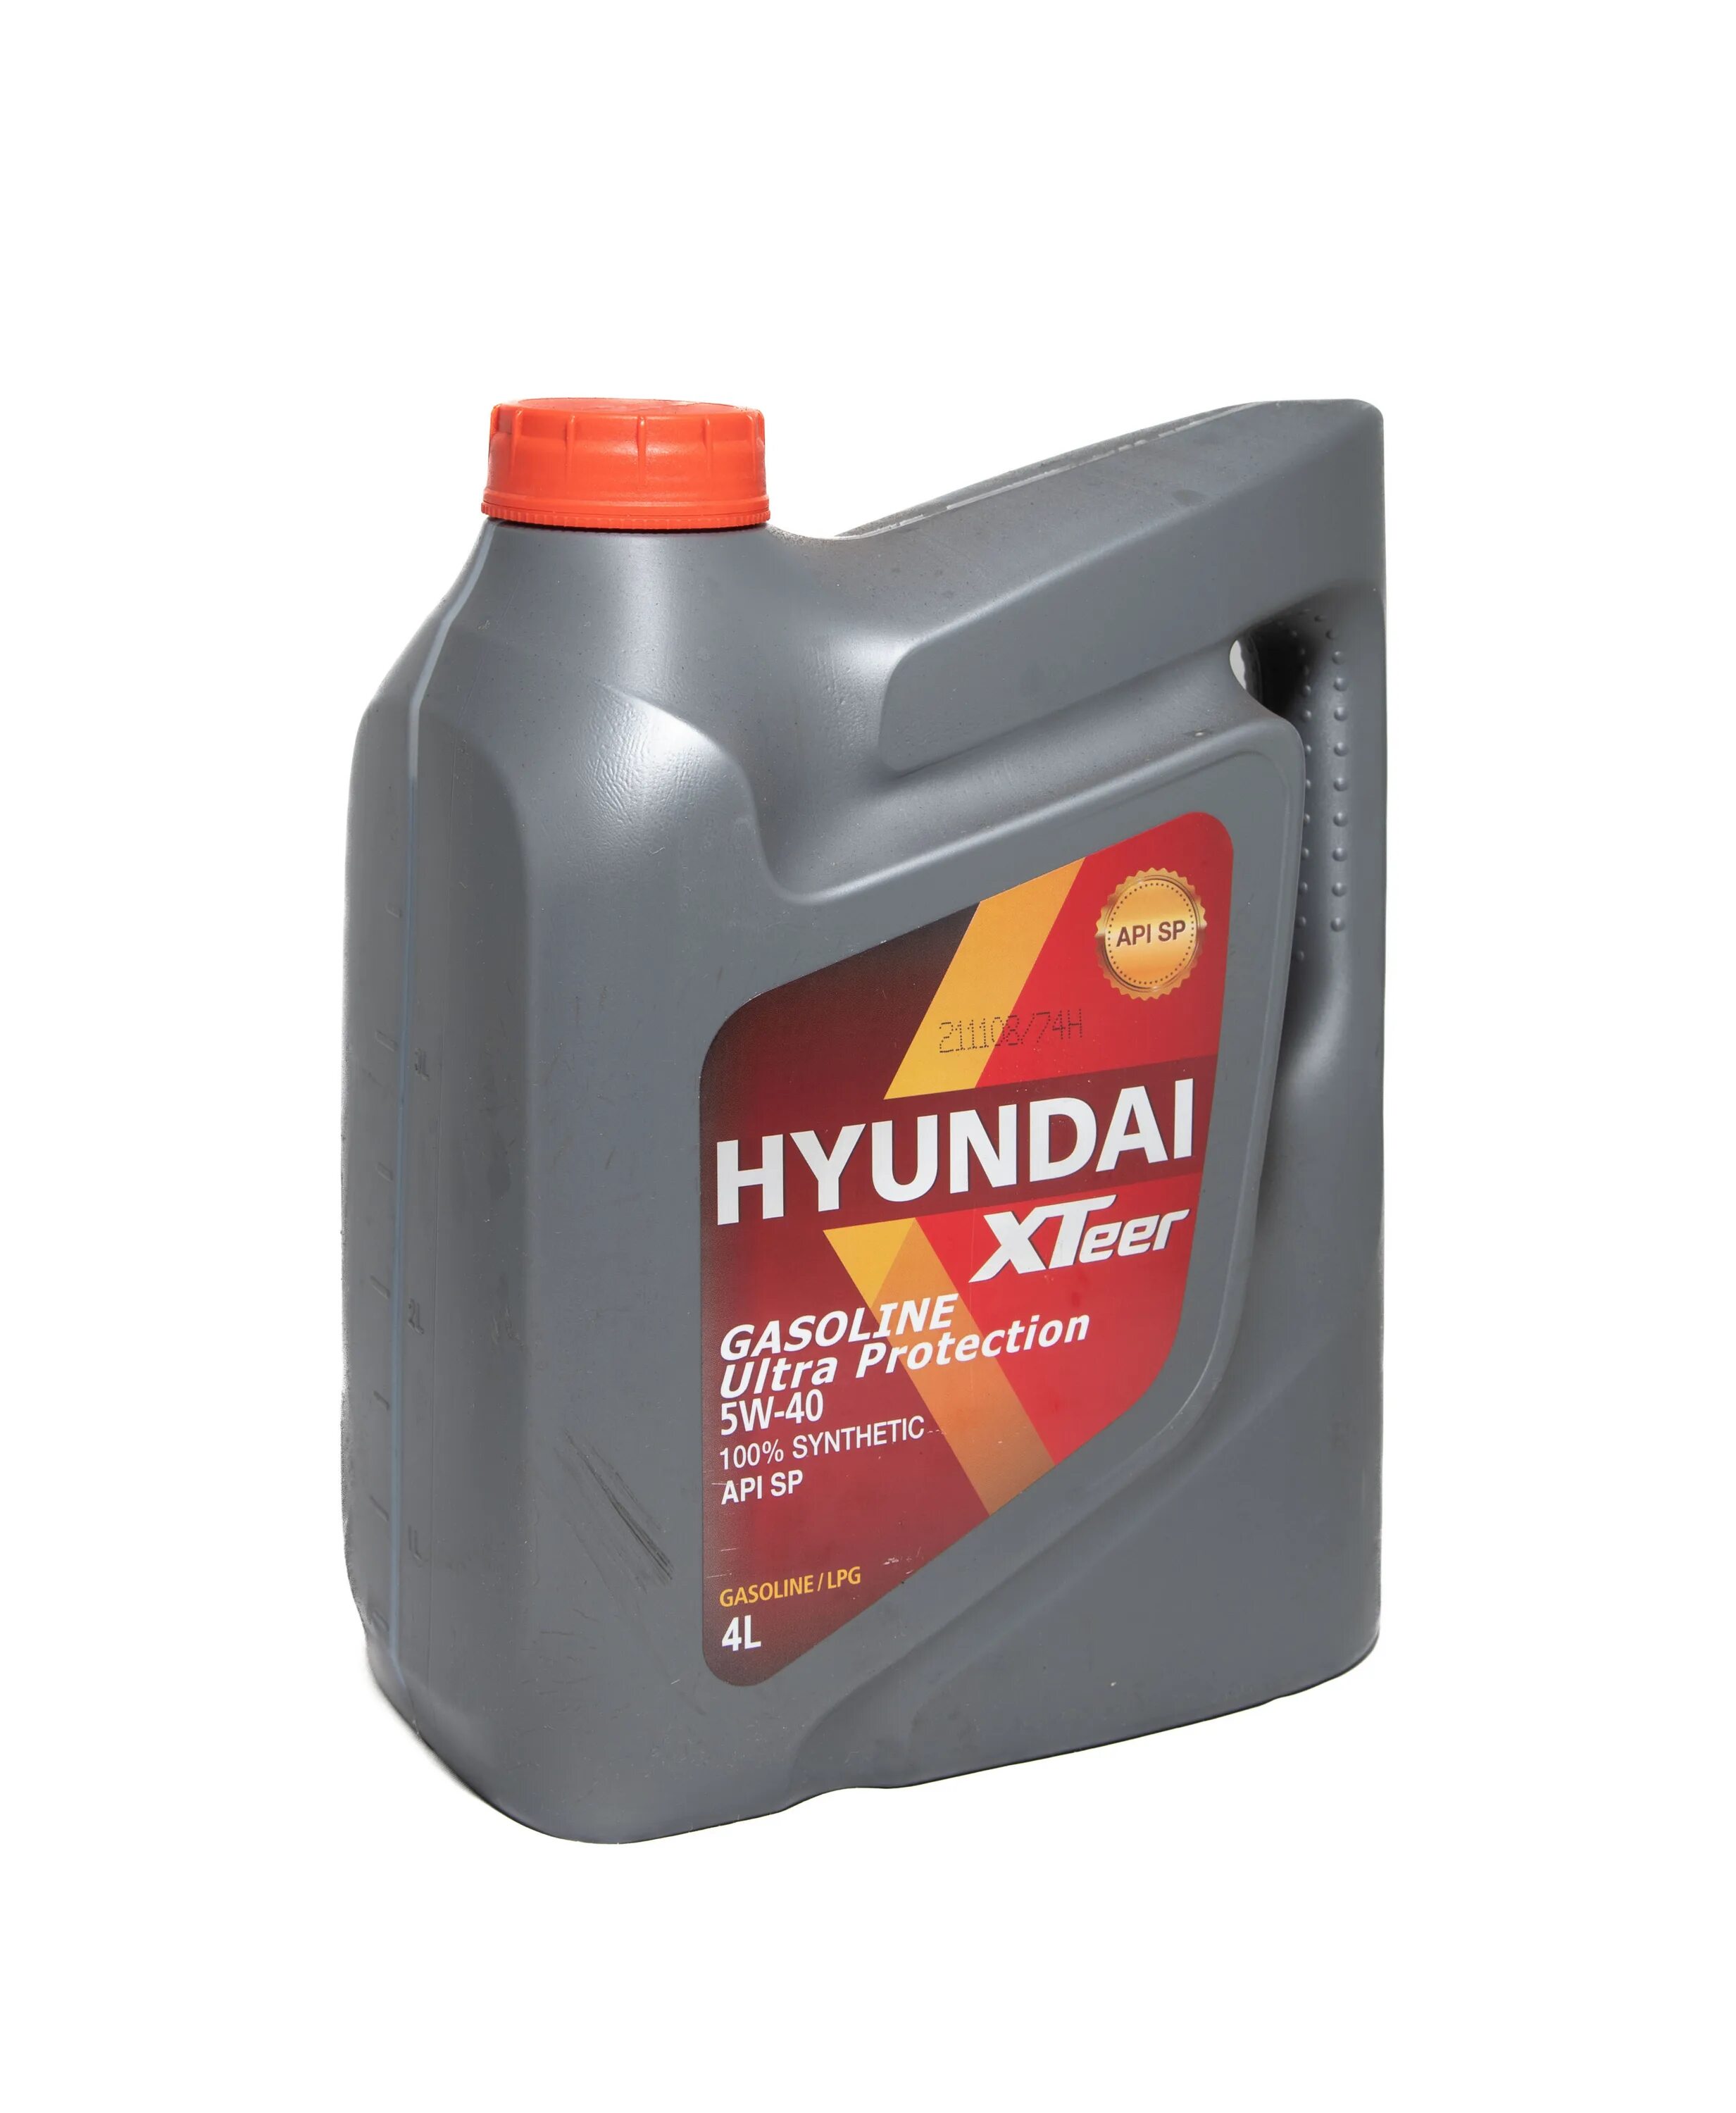 Hyundai xteer g800. Hyundai XTEER 5w40 4л. Hyundai XTEER 5w30. 1011413 Hyundai XTEER. Hyundai XTEER gasoline Ultra Protection 5w40 SP.